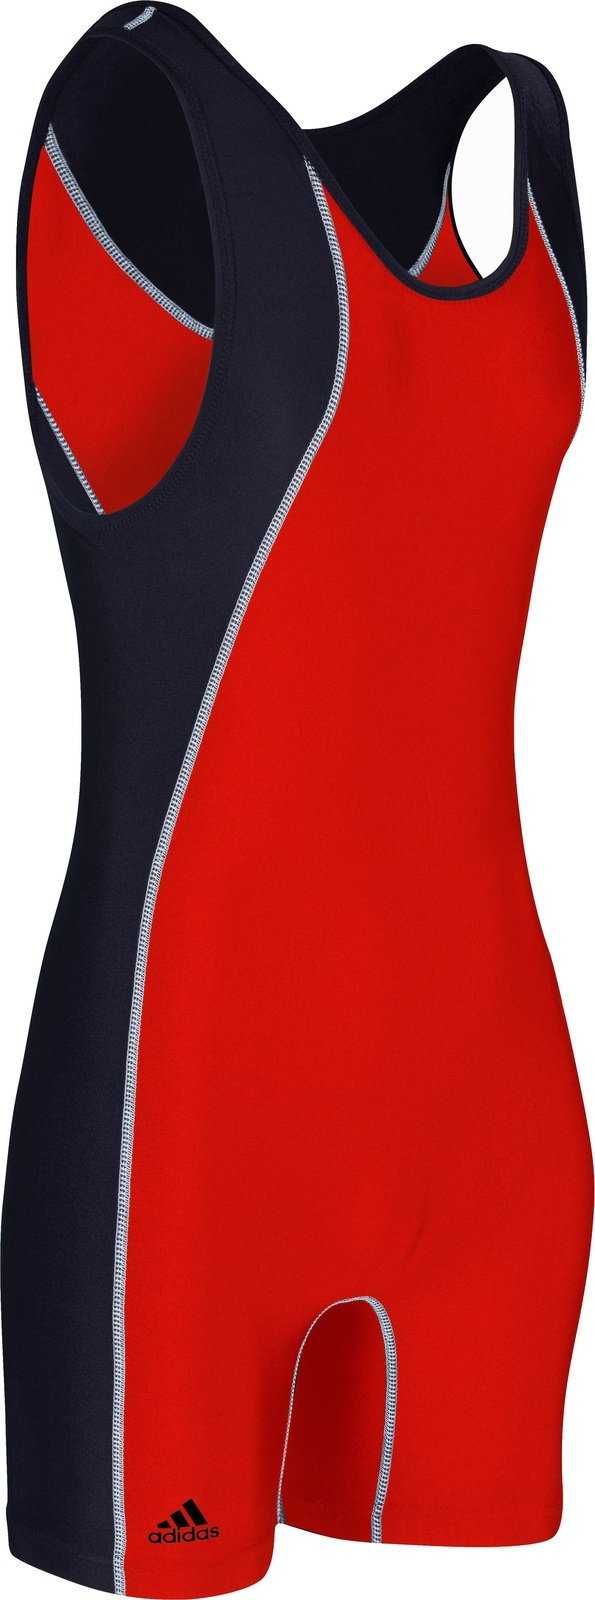 Adidas aS107s Wrestling Singlet - Red Black - HIT a Double